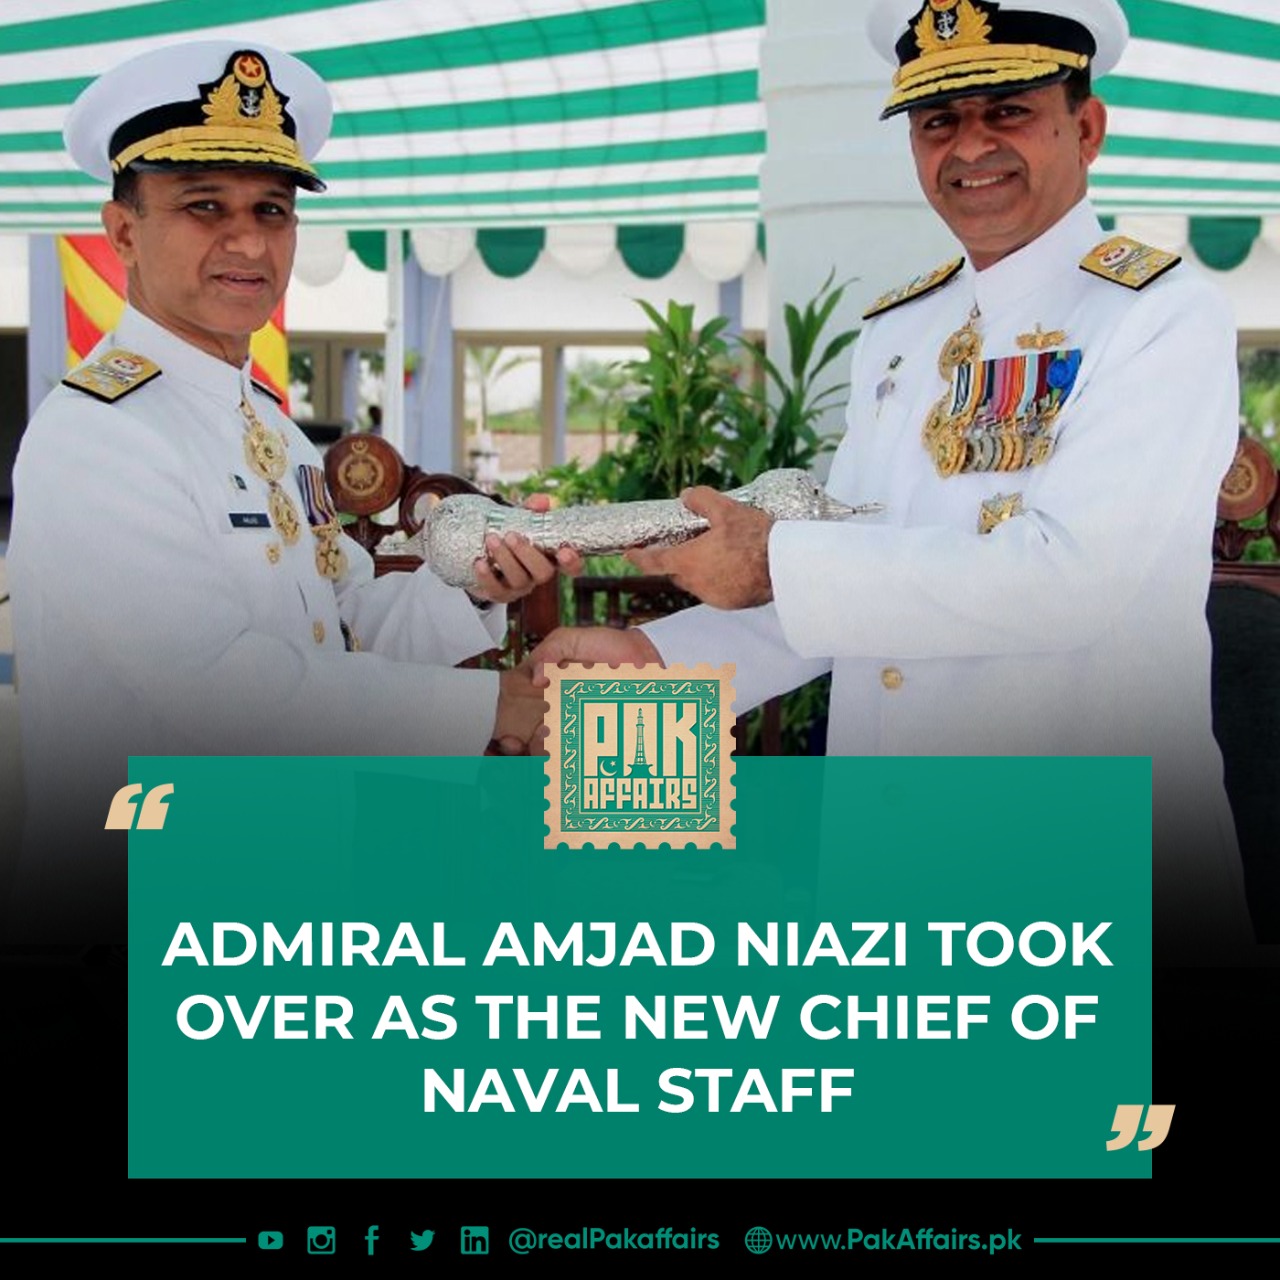 Admiral Amjad Niazi took over as the new Chief of Naval Staff